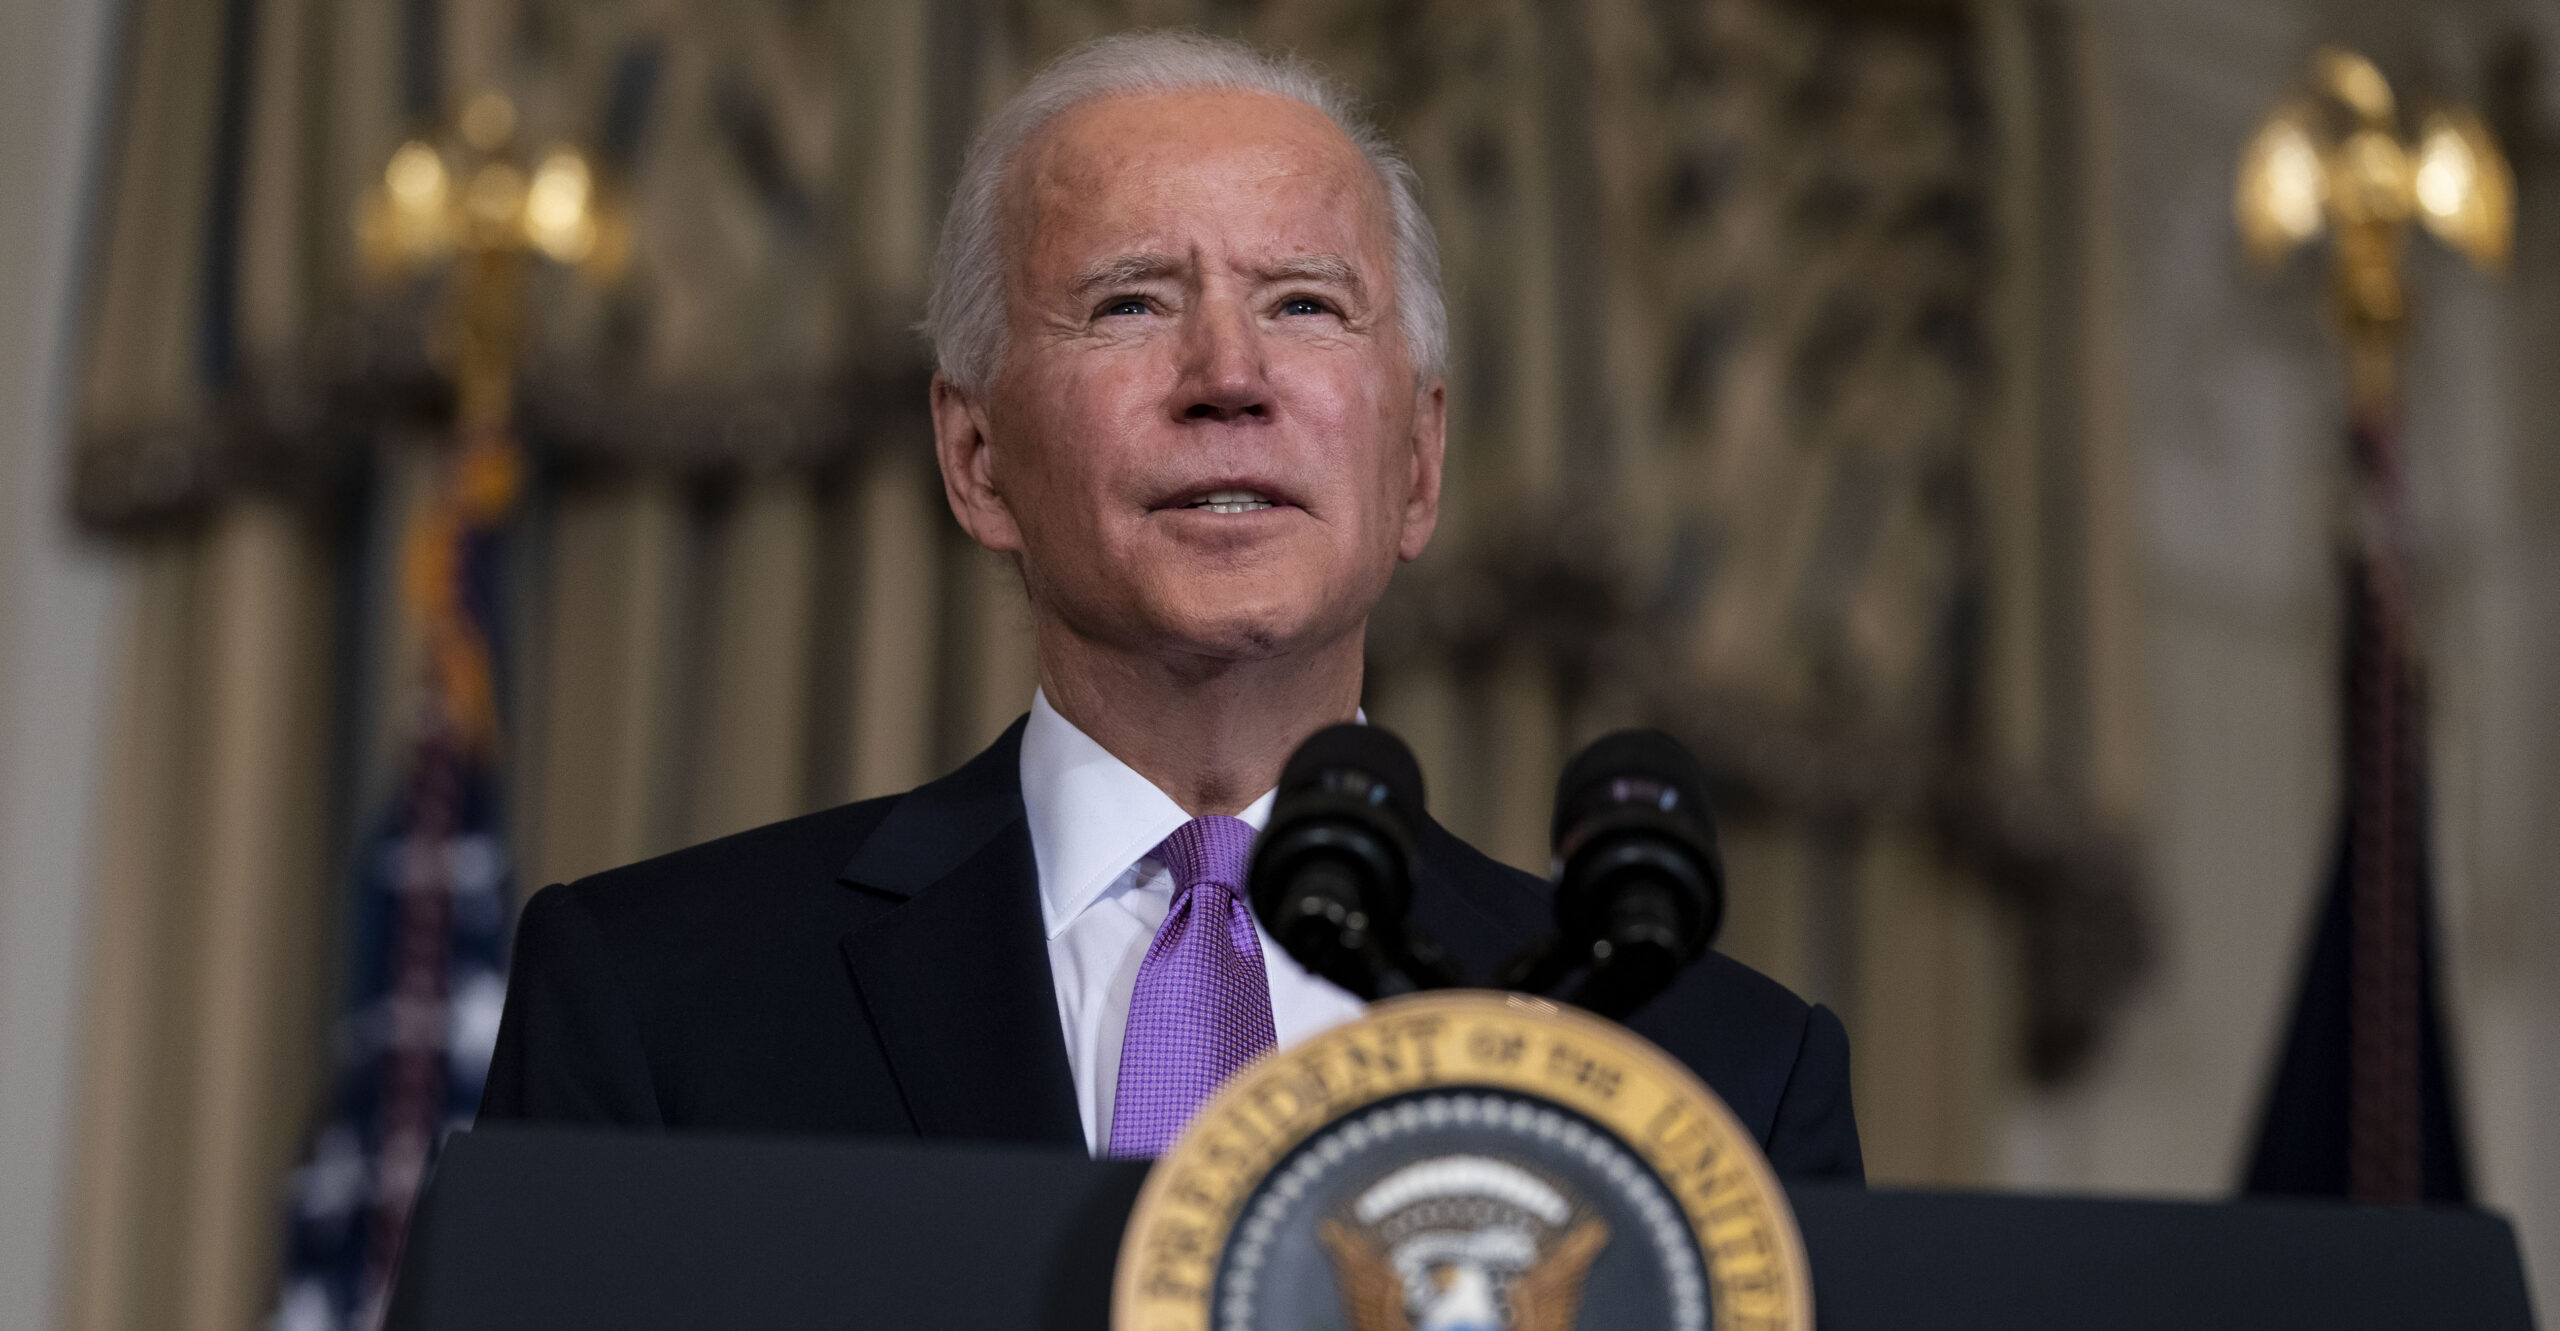 Biden Orders End to Private Prisons in Package to Achieve 'Racial Equity'